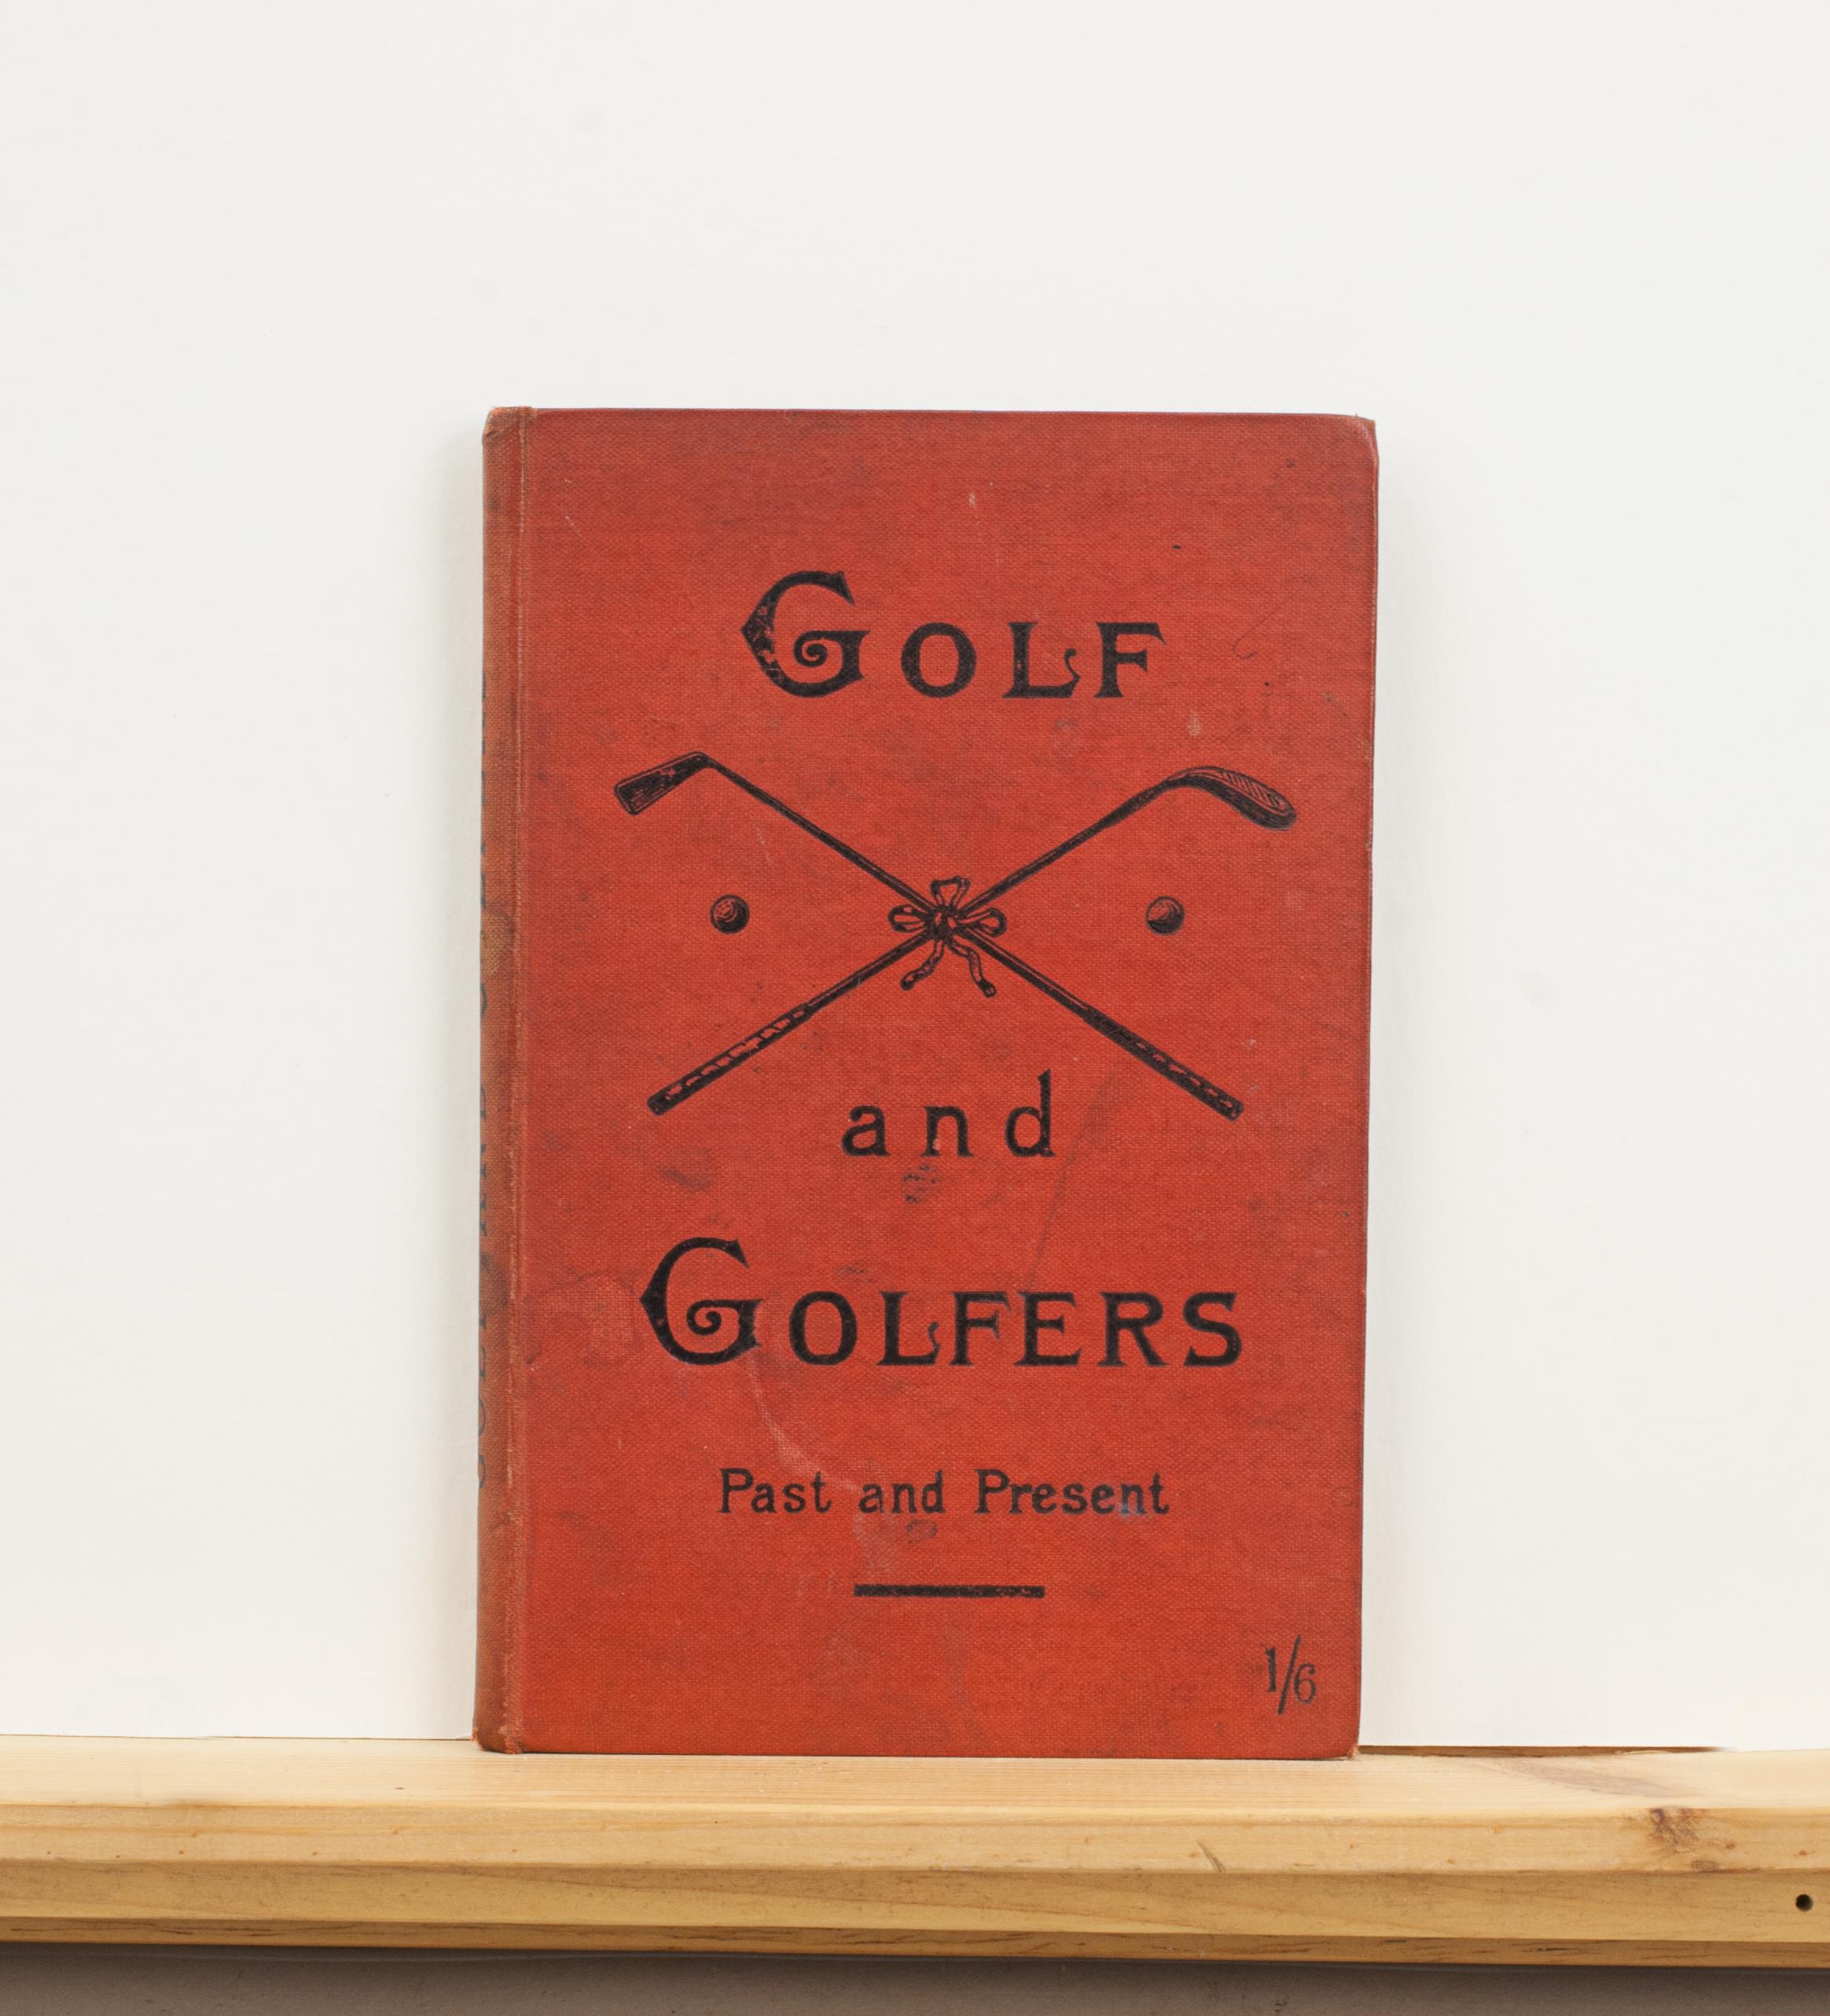 British Vintage Golf Book, Golf and Golfers, Past and Present. For Sale